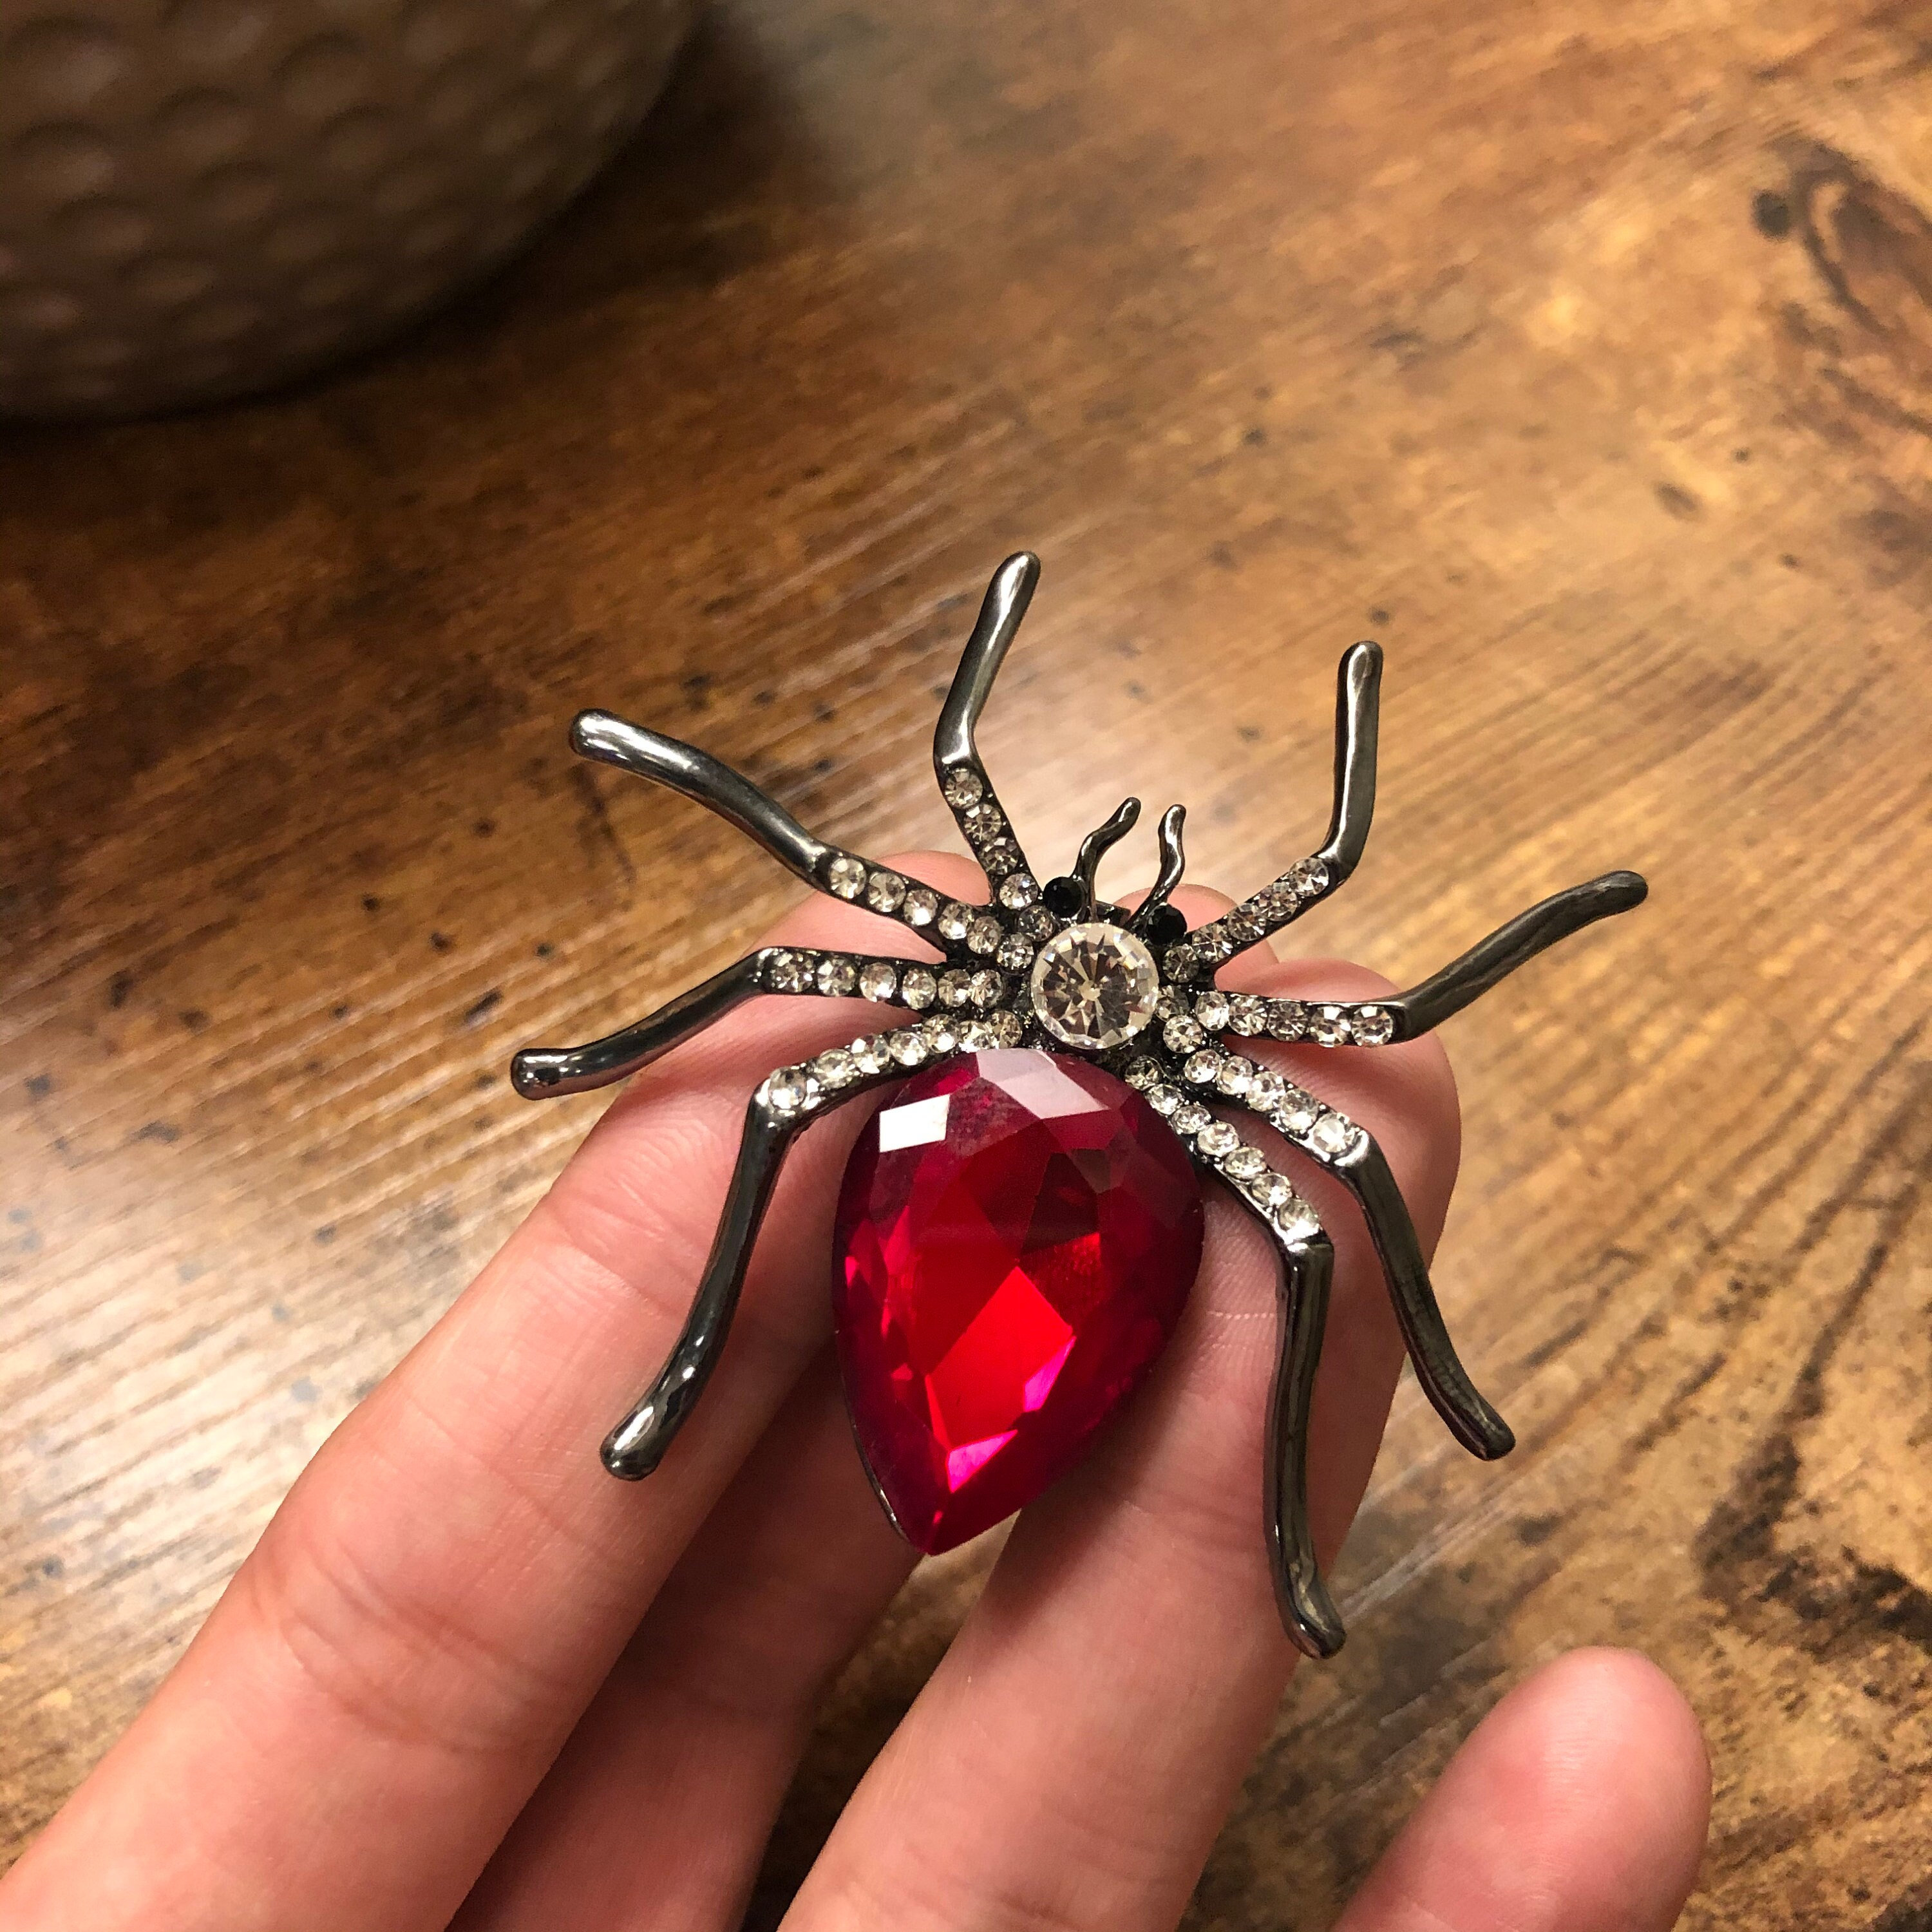 Vintage look silver plated red spider brooch suit coat broach